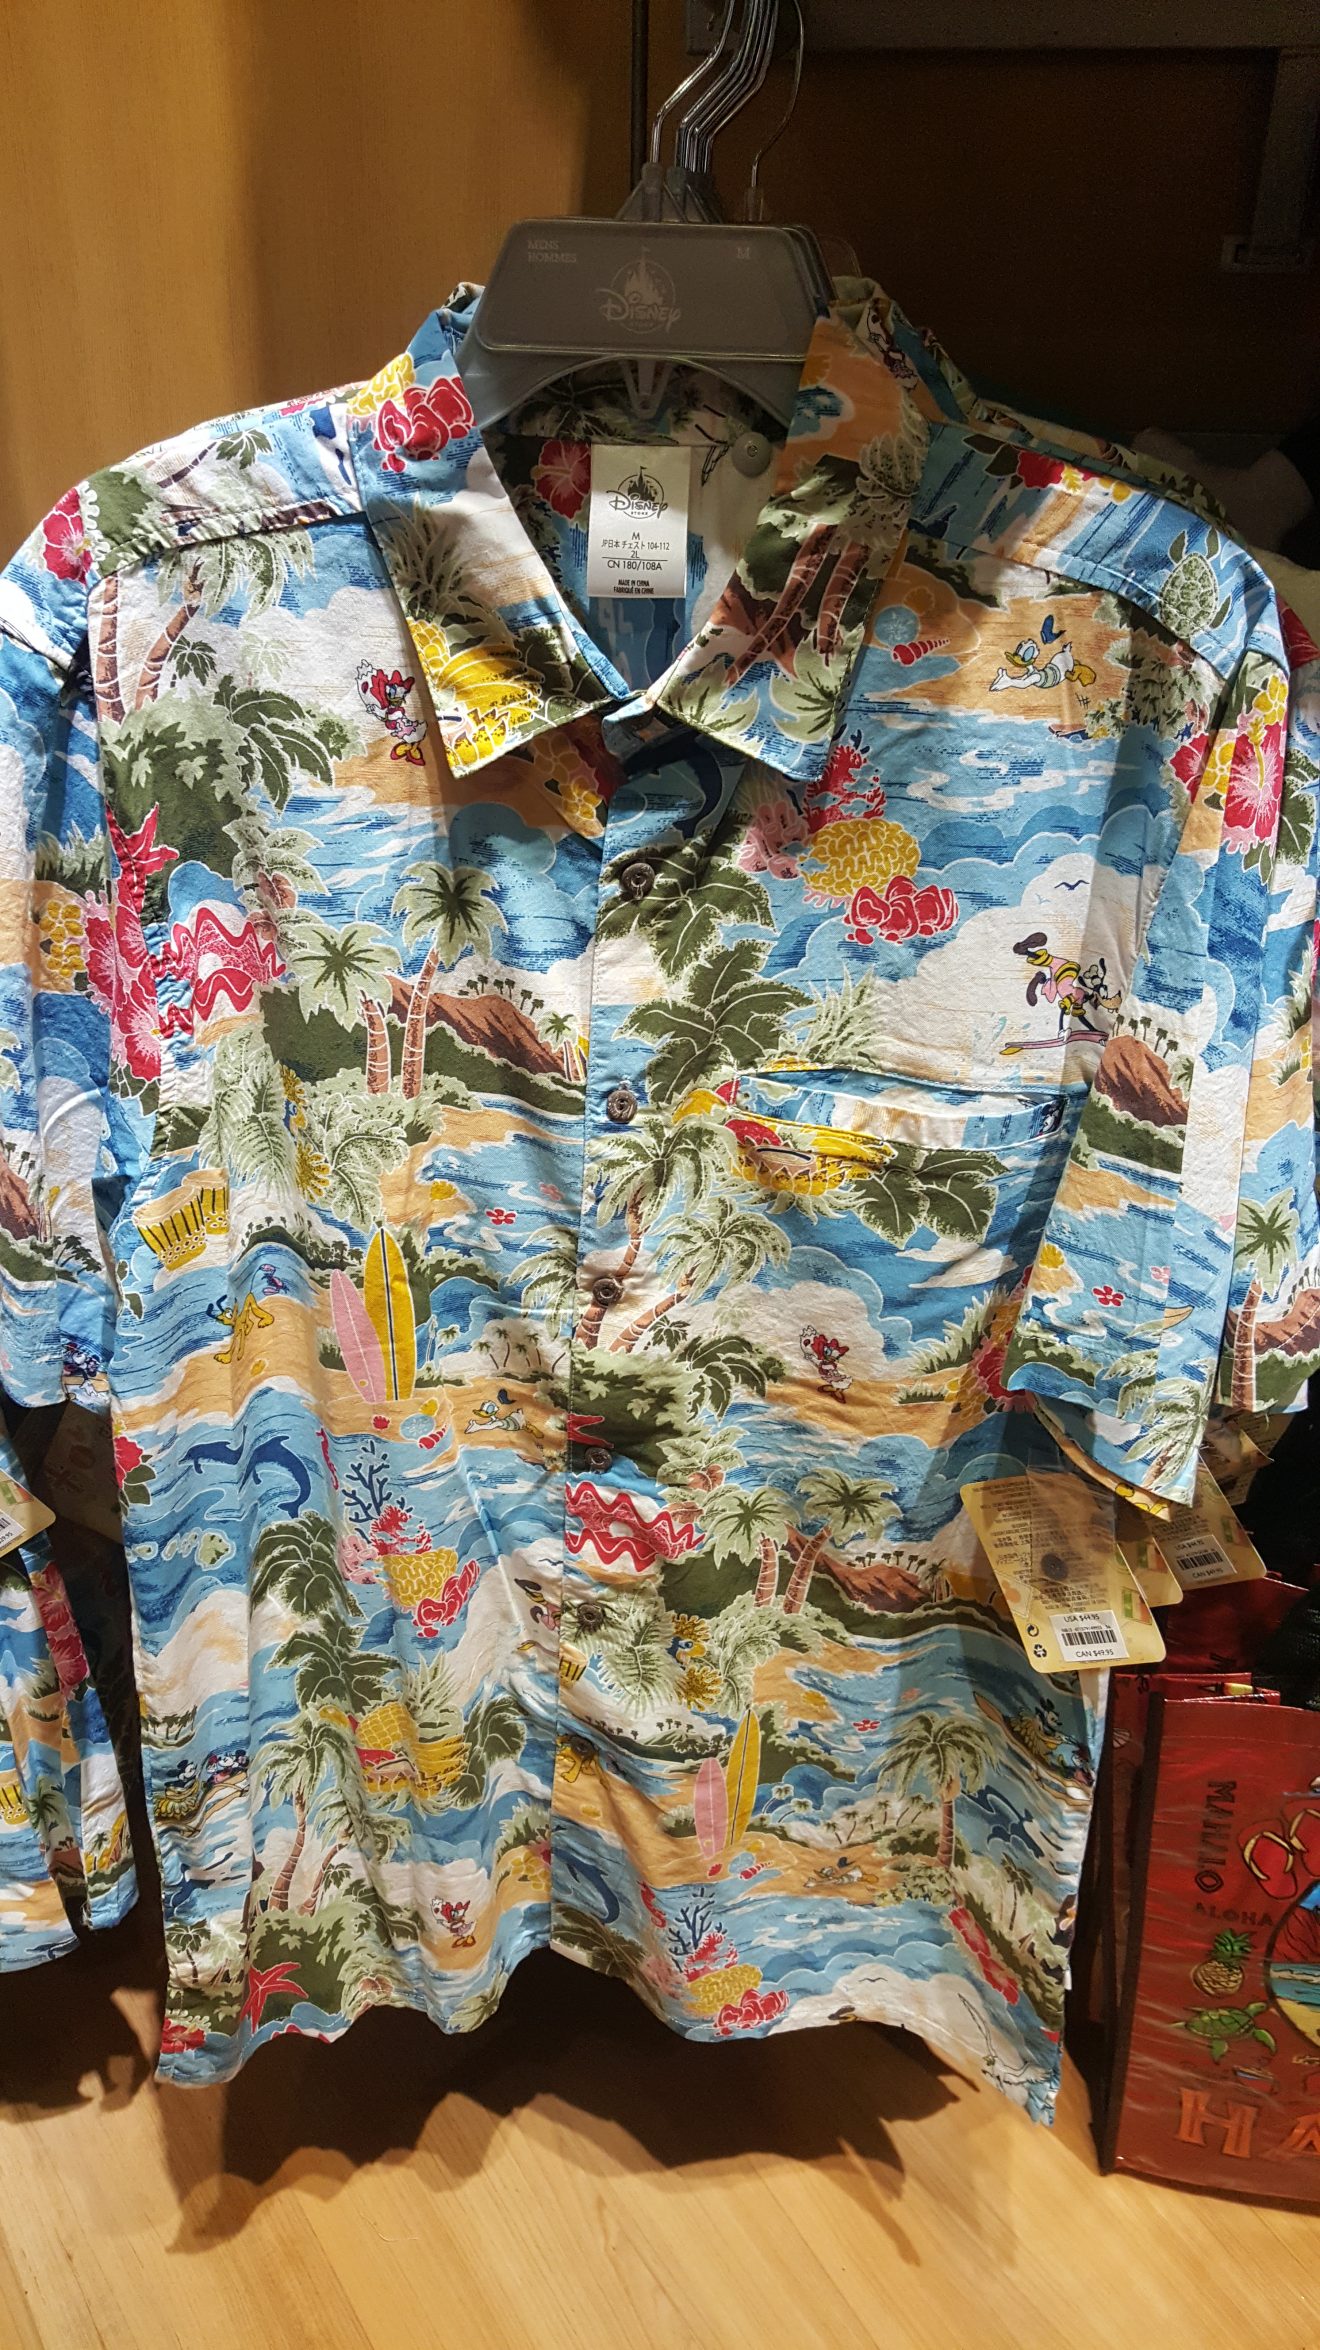 Grab A Souvenir In Hawaii From The Disney Store In Honolulu!